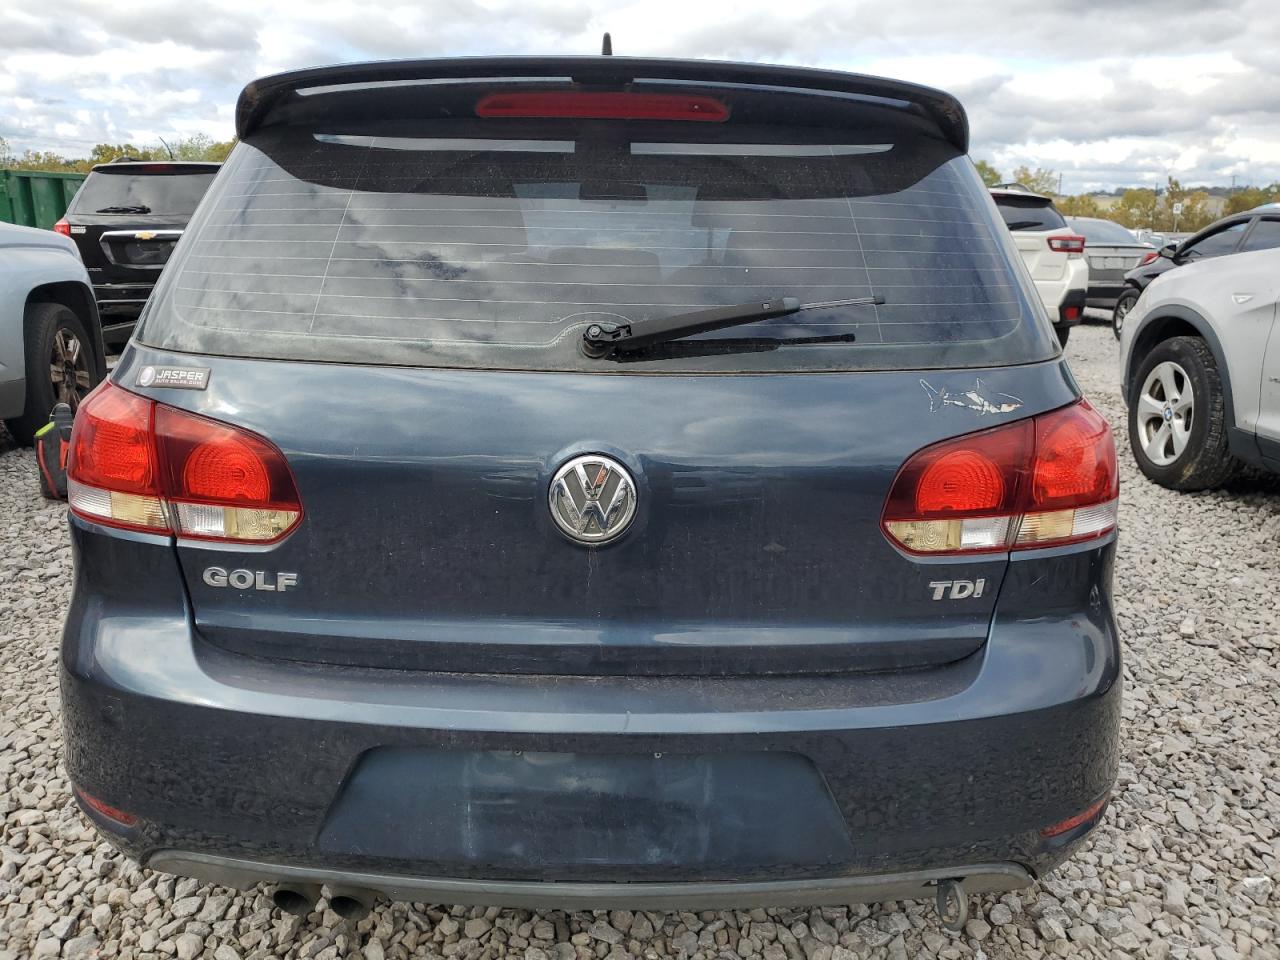 WVWDM7AJXDW****** Salvage and Repairable 2013 Volkswagen Golf in Alabama State